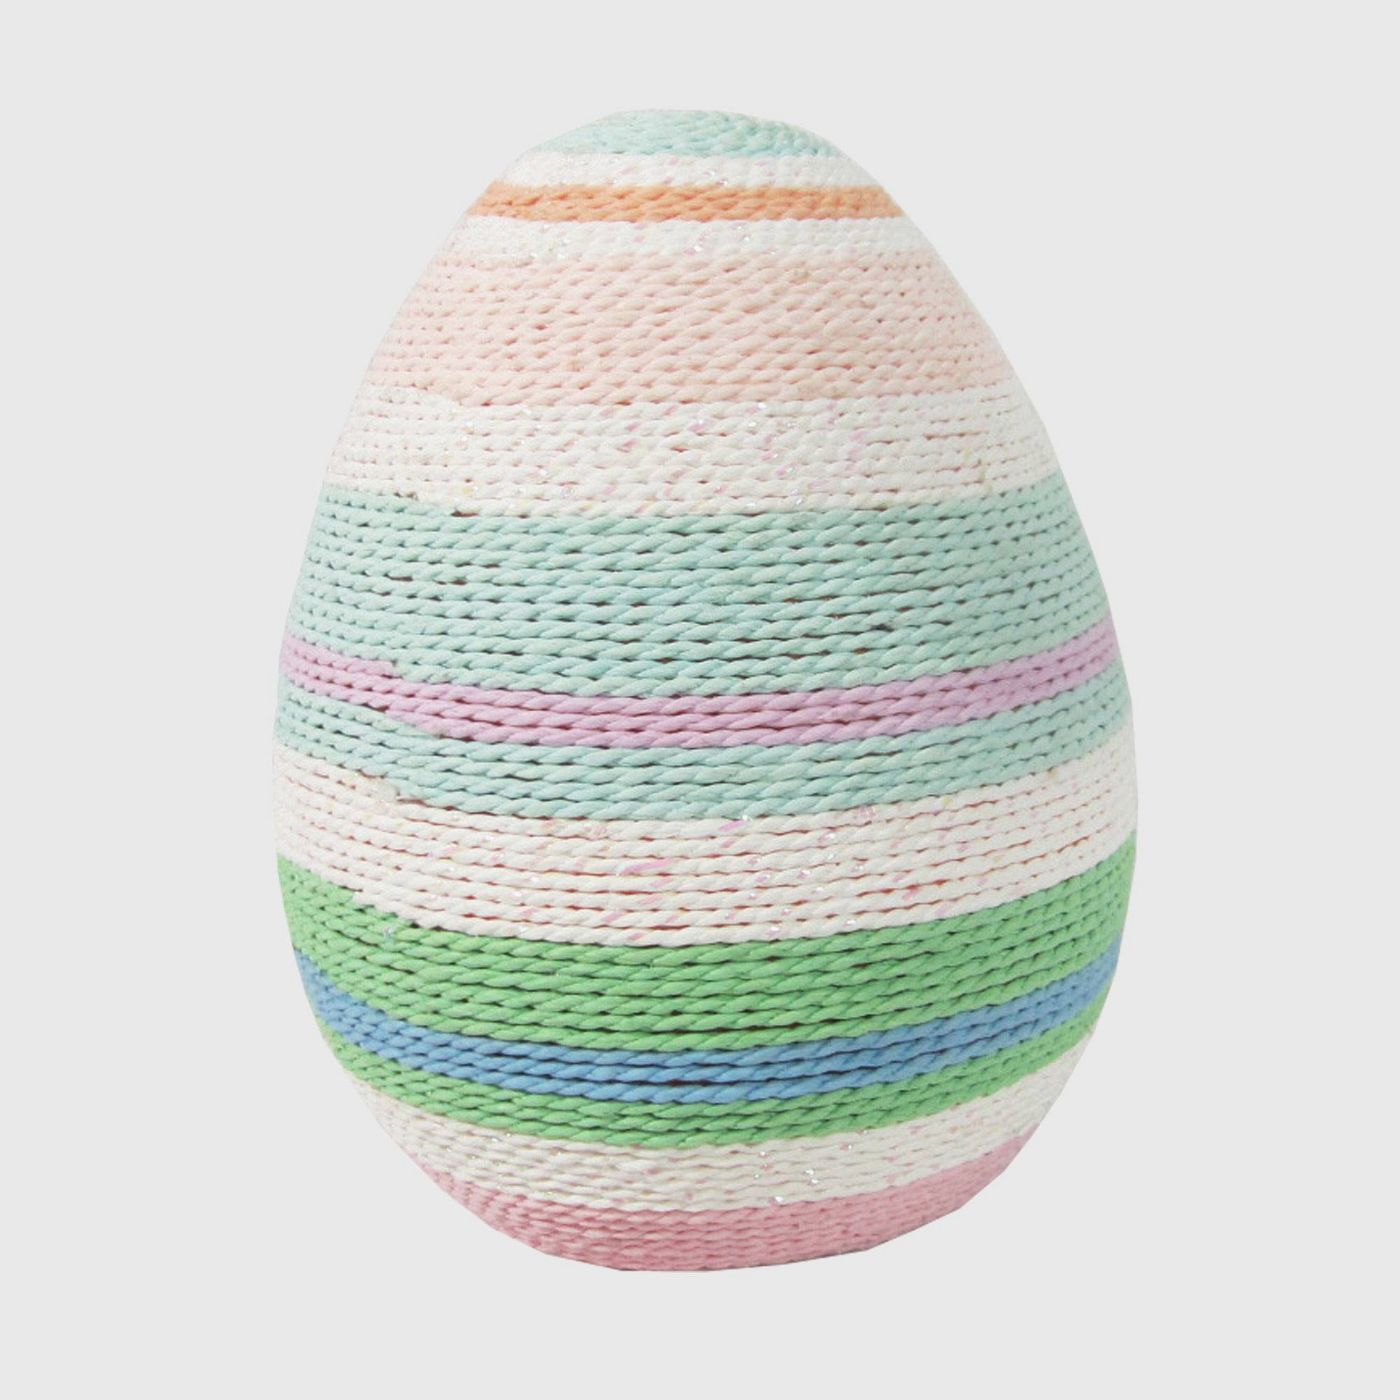 Yarn-wrapped Easter egg from Spritz